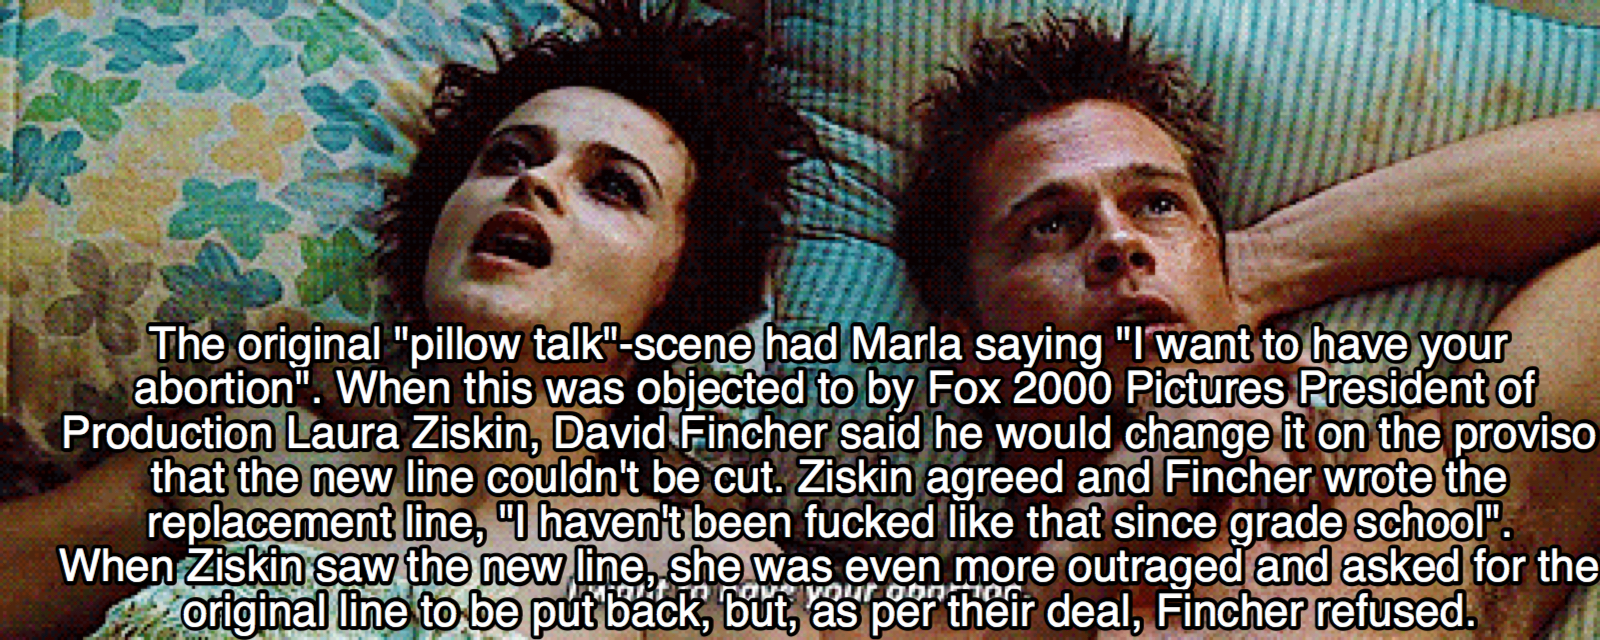 photo caption - The original "pillow talk"scene had Marla saying "I want to have your abortion". When this was objected to by Fox 2000 Pictures President of Production Laura Ziskin, David Fincher said he would change it on the proviso that the new line co